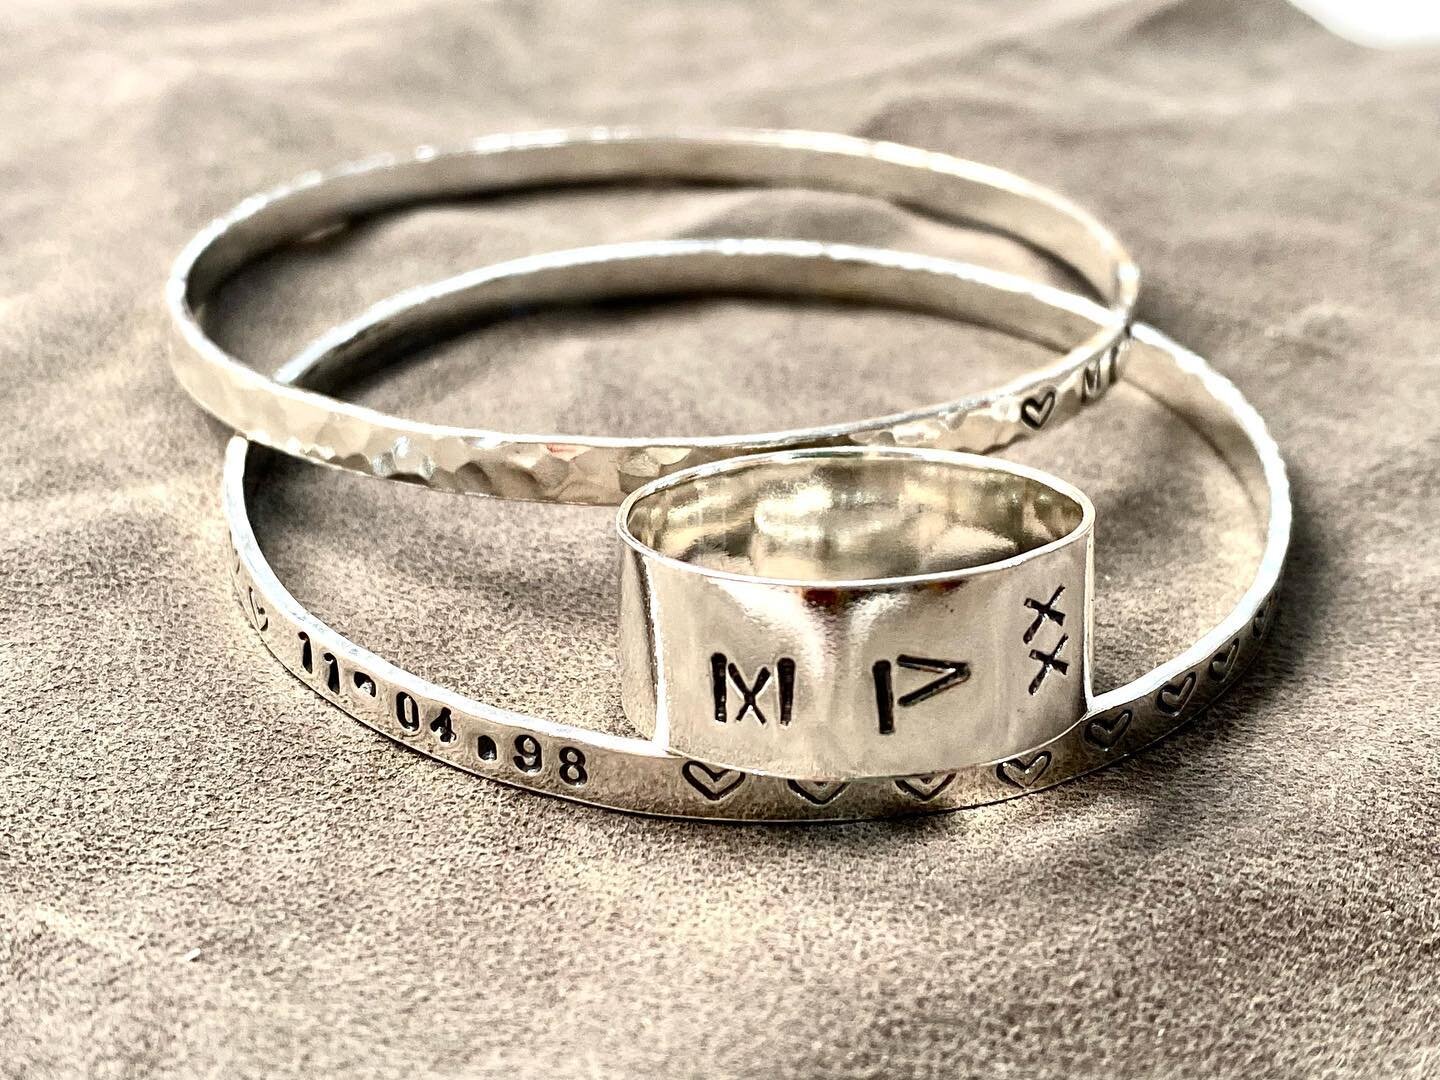 The secret formula for a 25-year marriage&hellip; Balance ⚖️ laughter 🤭 &amp; lurve ❤️ Had the pleasure of hosting Karen &amp; Mike at the workshop this week to celebrate their silver wedding anniversary and they made some silver smashers. Nordic ru